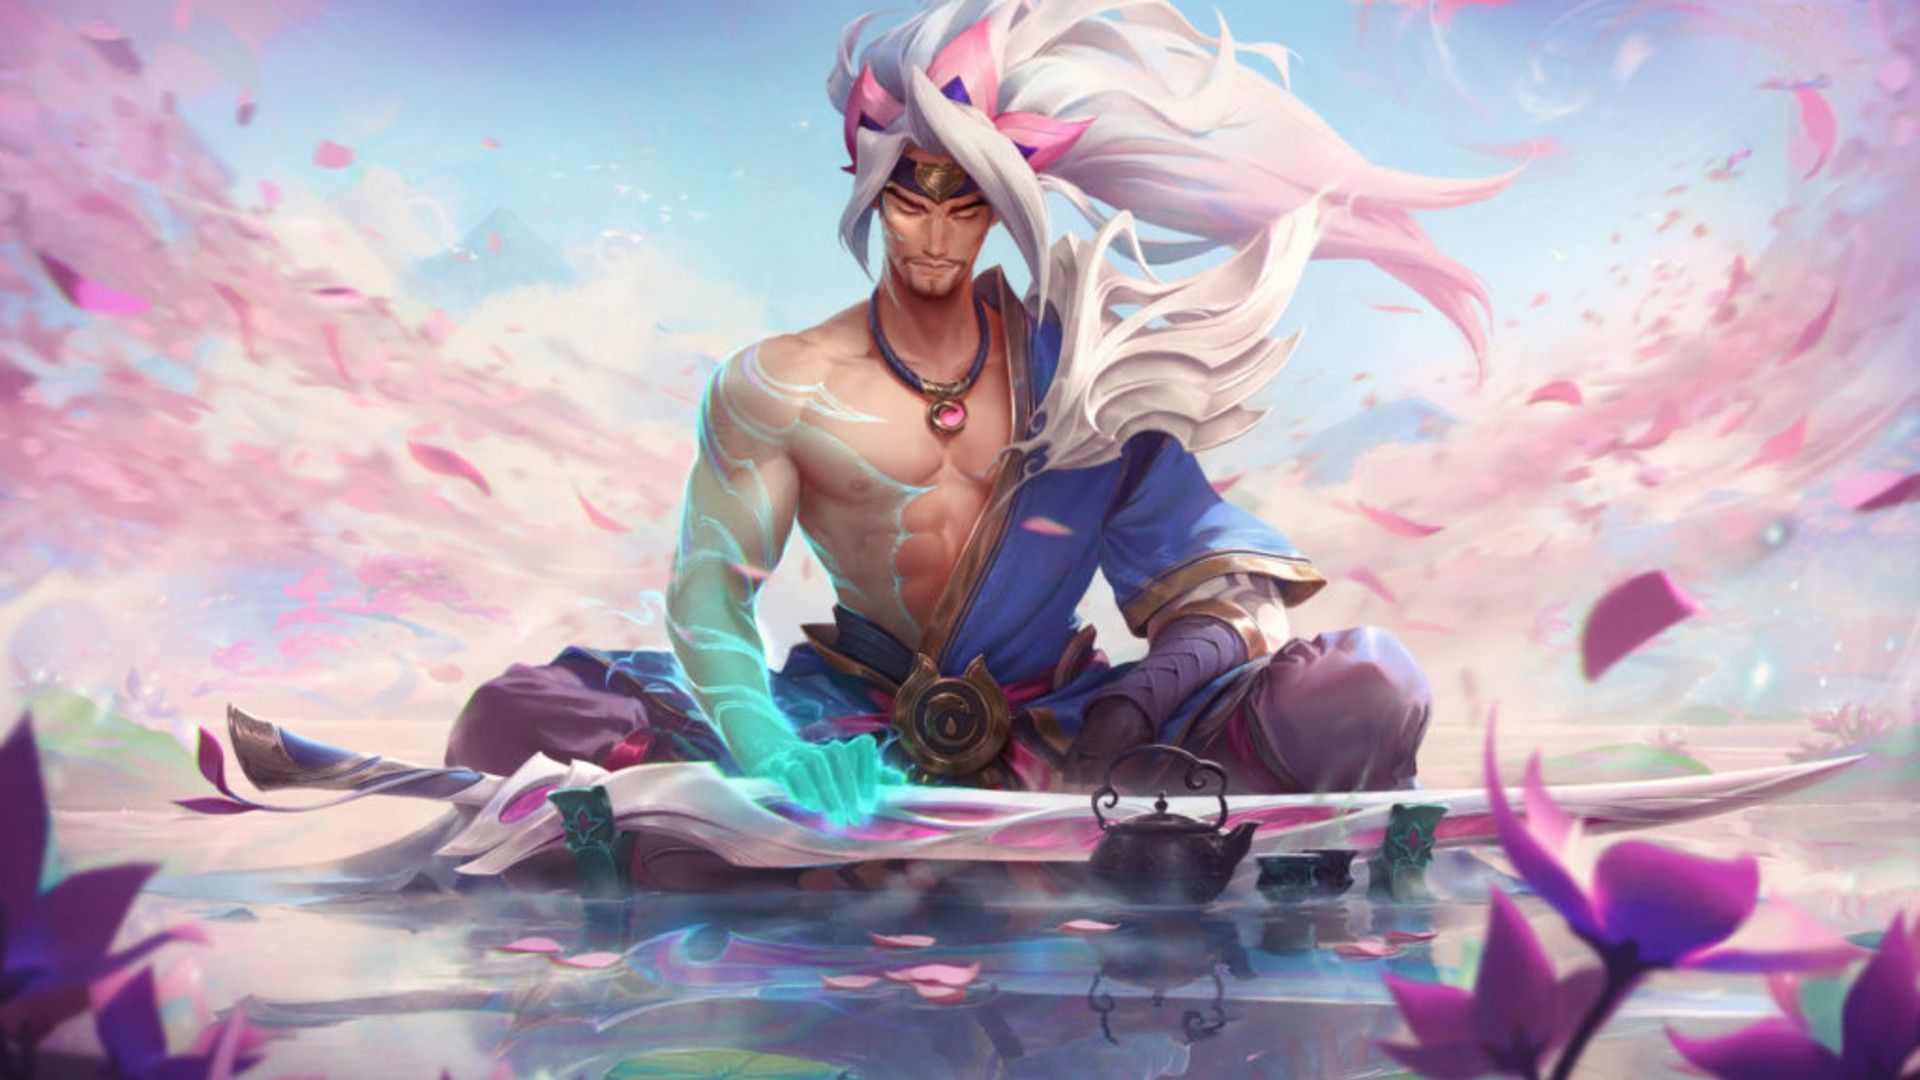 Pre Season 2021: Adjustment For Crit System. Is It A Disaster For Yone And Yasuo? A Gamer